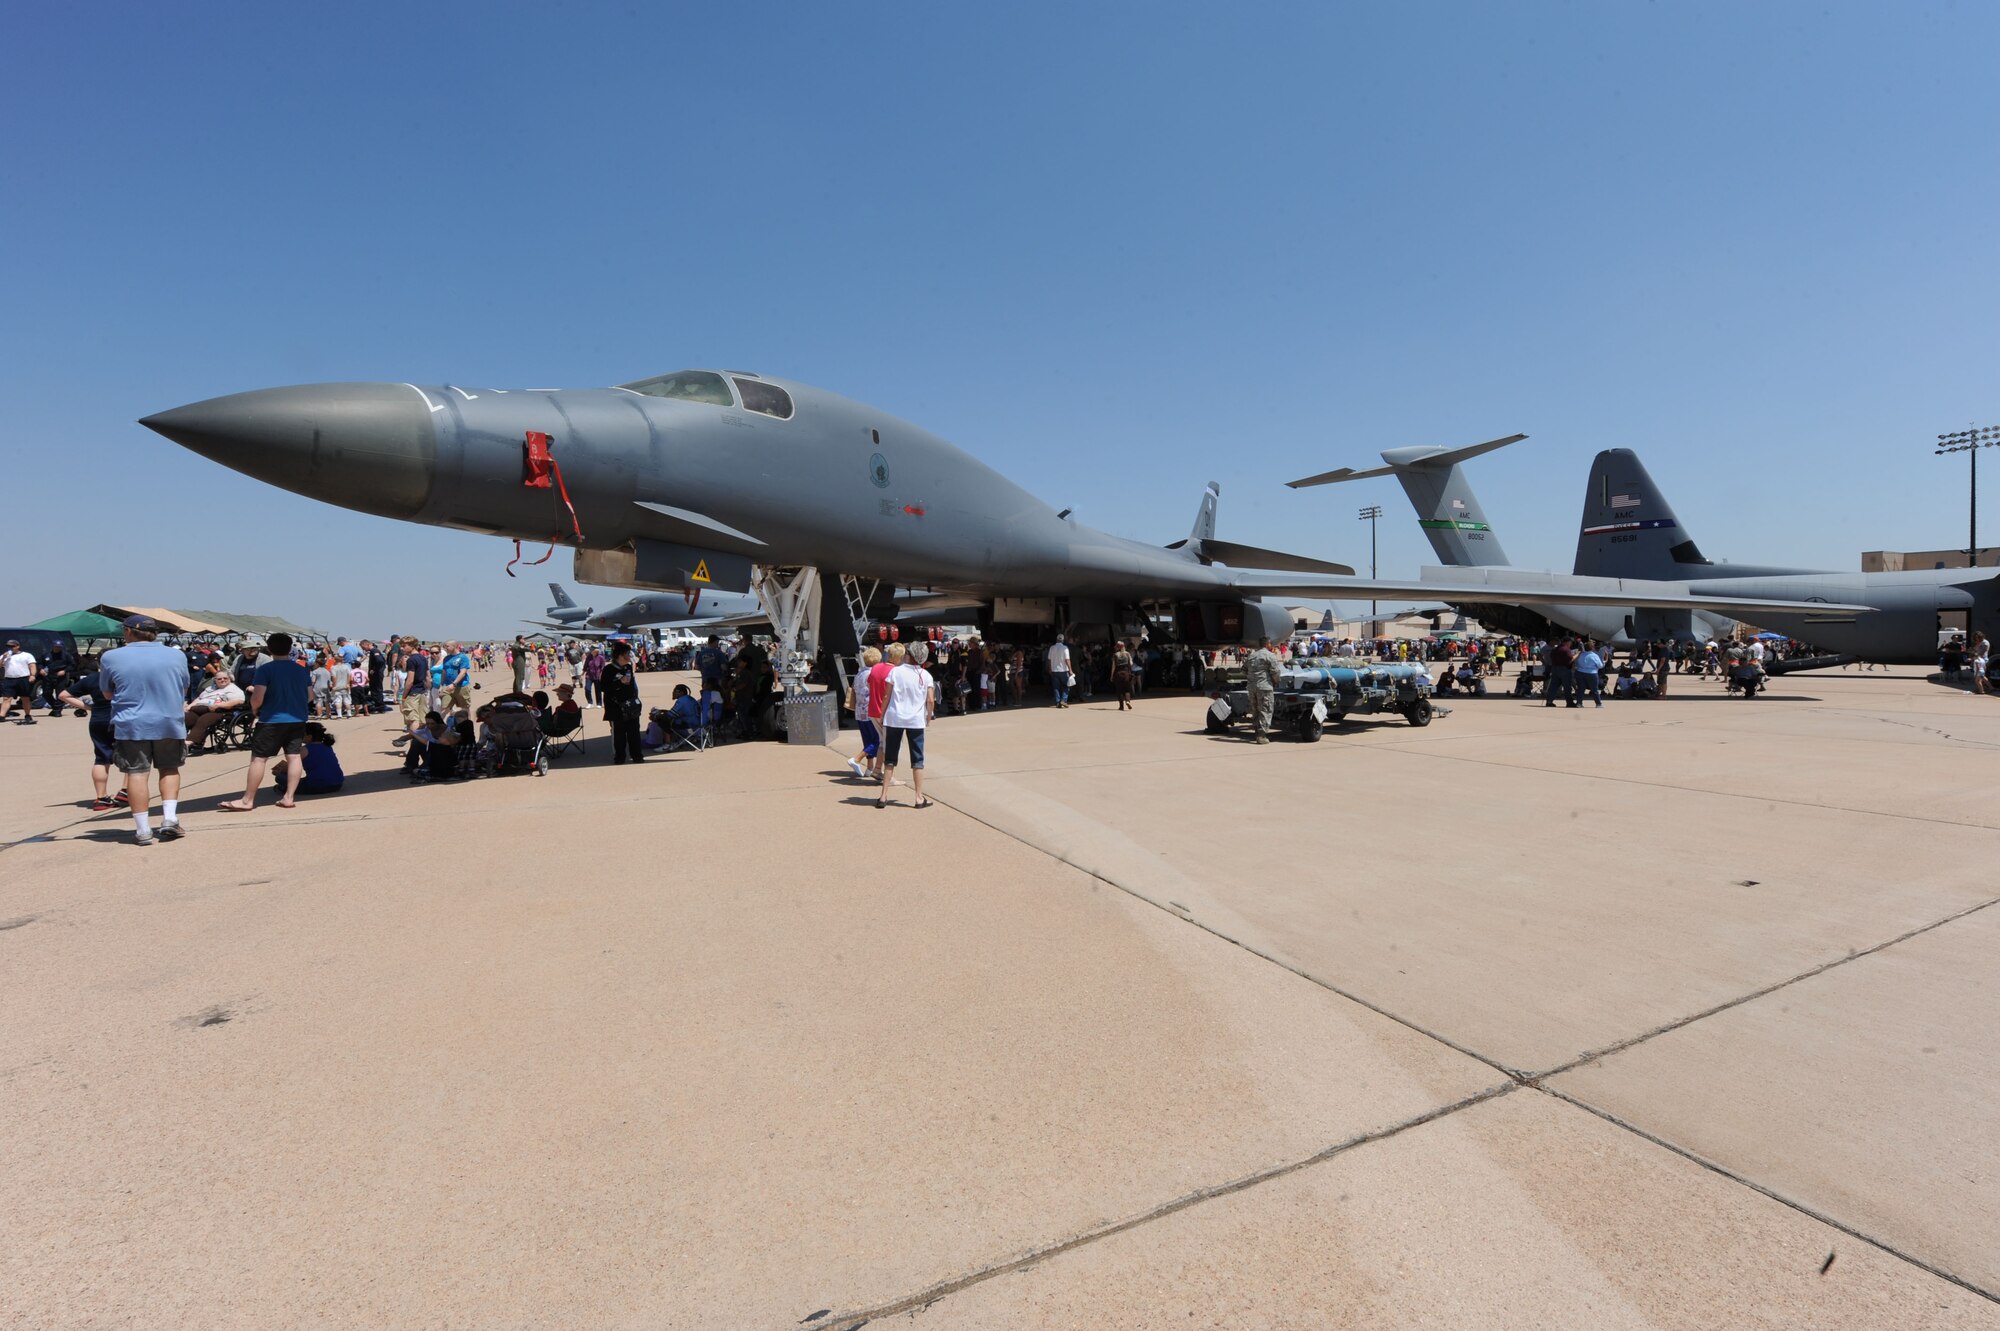 A B-1 Bomber sits on display during the Dyess Big Country Airfest April 28, 2012, at Dyess Air Force Base, Texas. The Airfest was designed to inform the public about the capabilities, equipment, training and professionalism of the Air Force and its sister services. (U.S. Air Force photo by Staff Sgt. Richard P. Ebensberger/ Released)